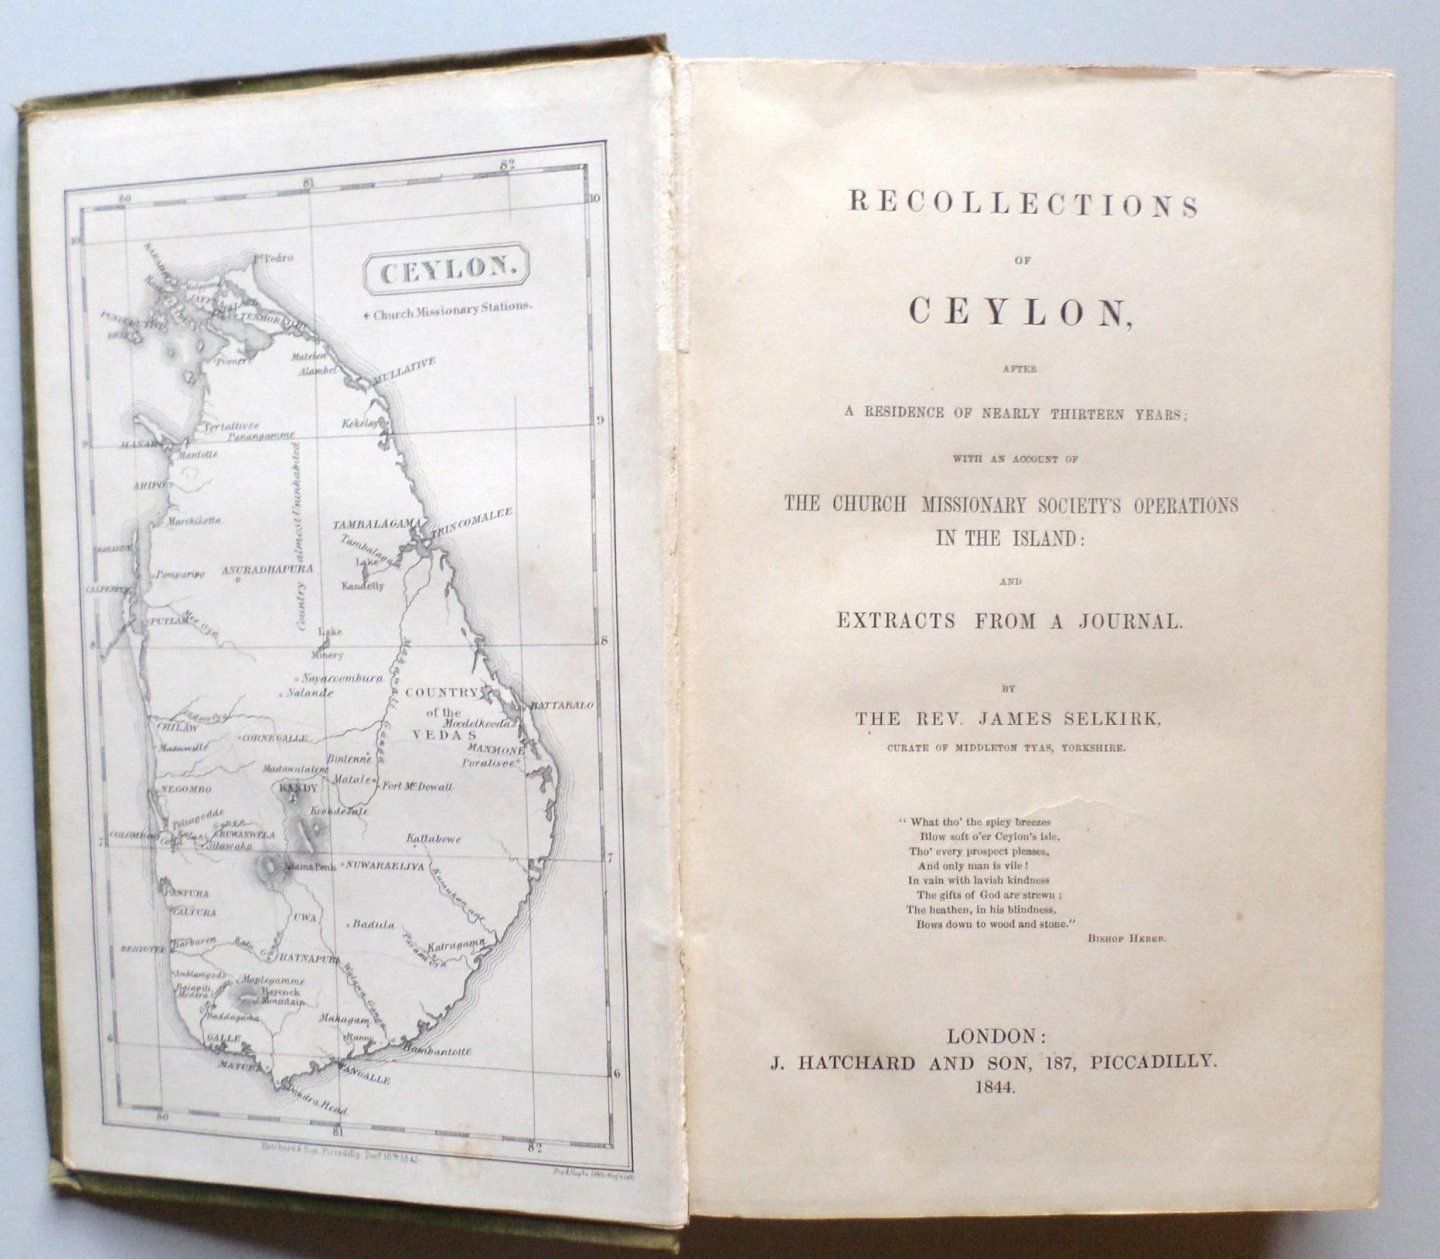 Selkirk, James - Recollections of Ceylon, after a Residence of Nearly Thirteen Years; with an Account of the Church Missionary Society's Operations in the Island: and Extracts from a Journal.